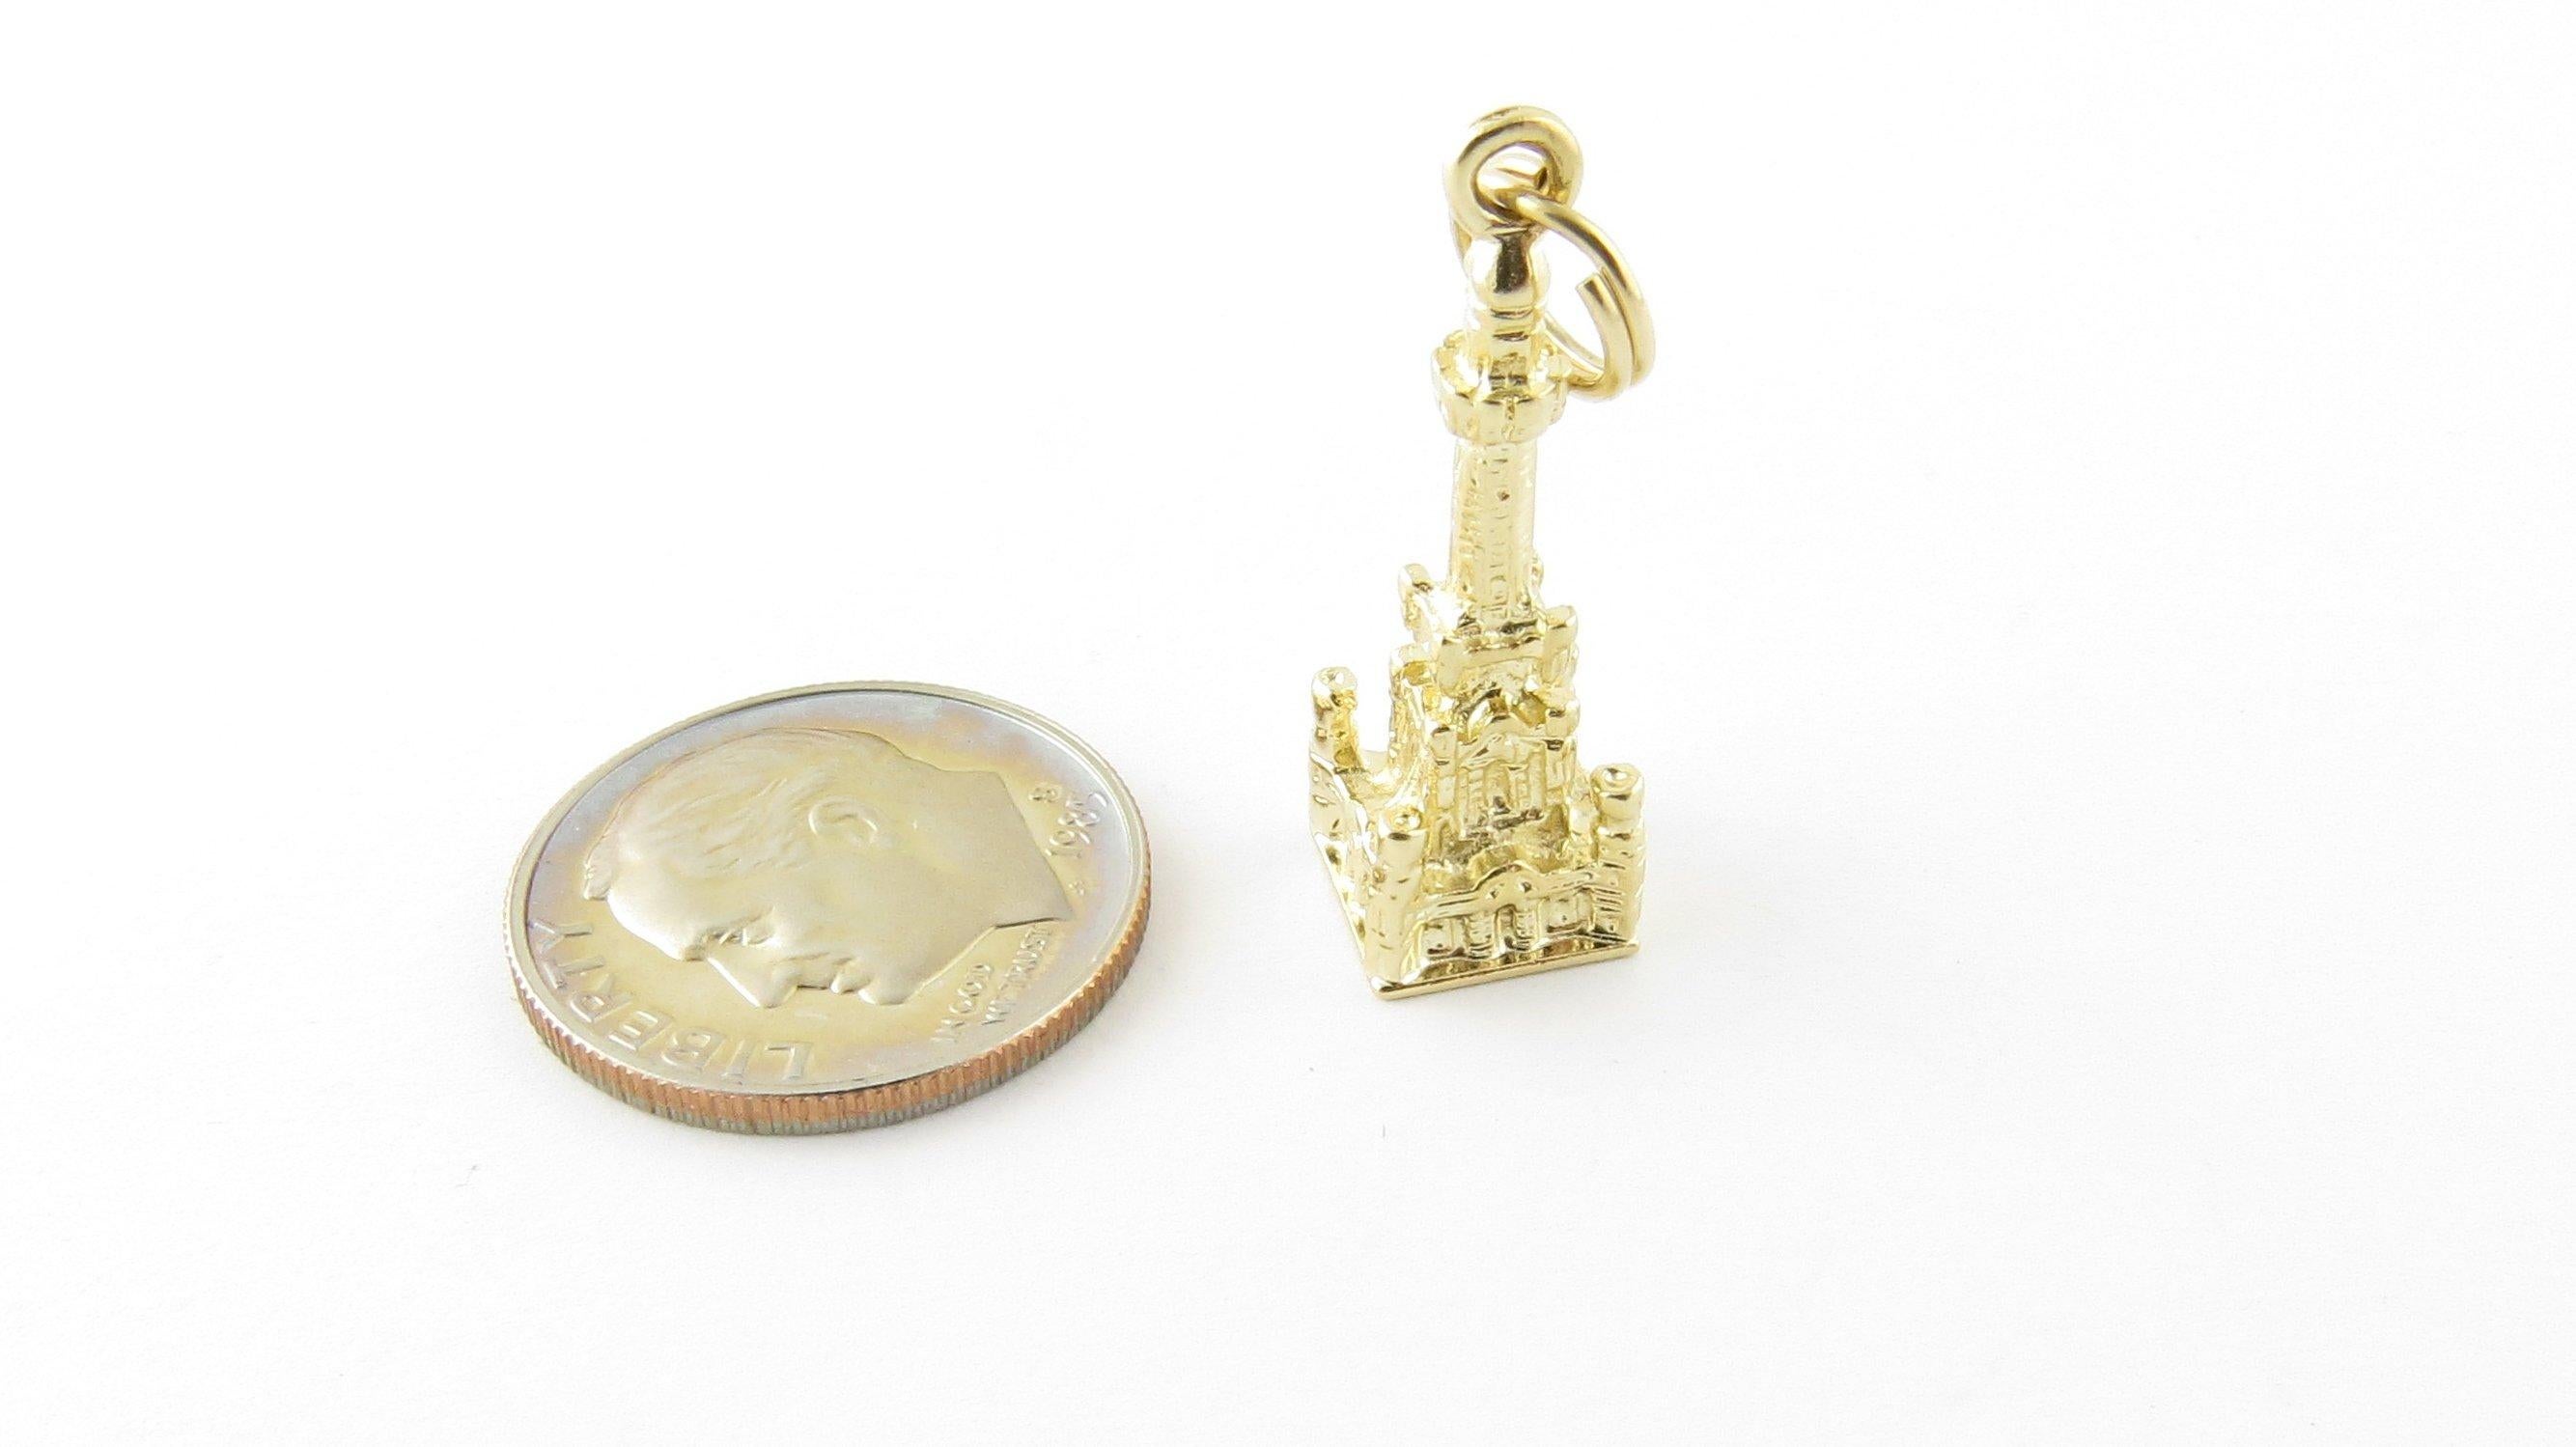 Vintage 14 Karat Yellow Gold Chicago Water Tower Charm. Commemorate your visit to this famous along the Magnificent Mile shopping district in Chicago! This lovely 3D charm features the Chicago Water Tower meticulously detailed in 14K yellow